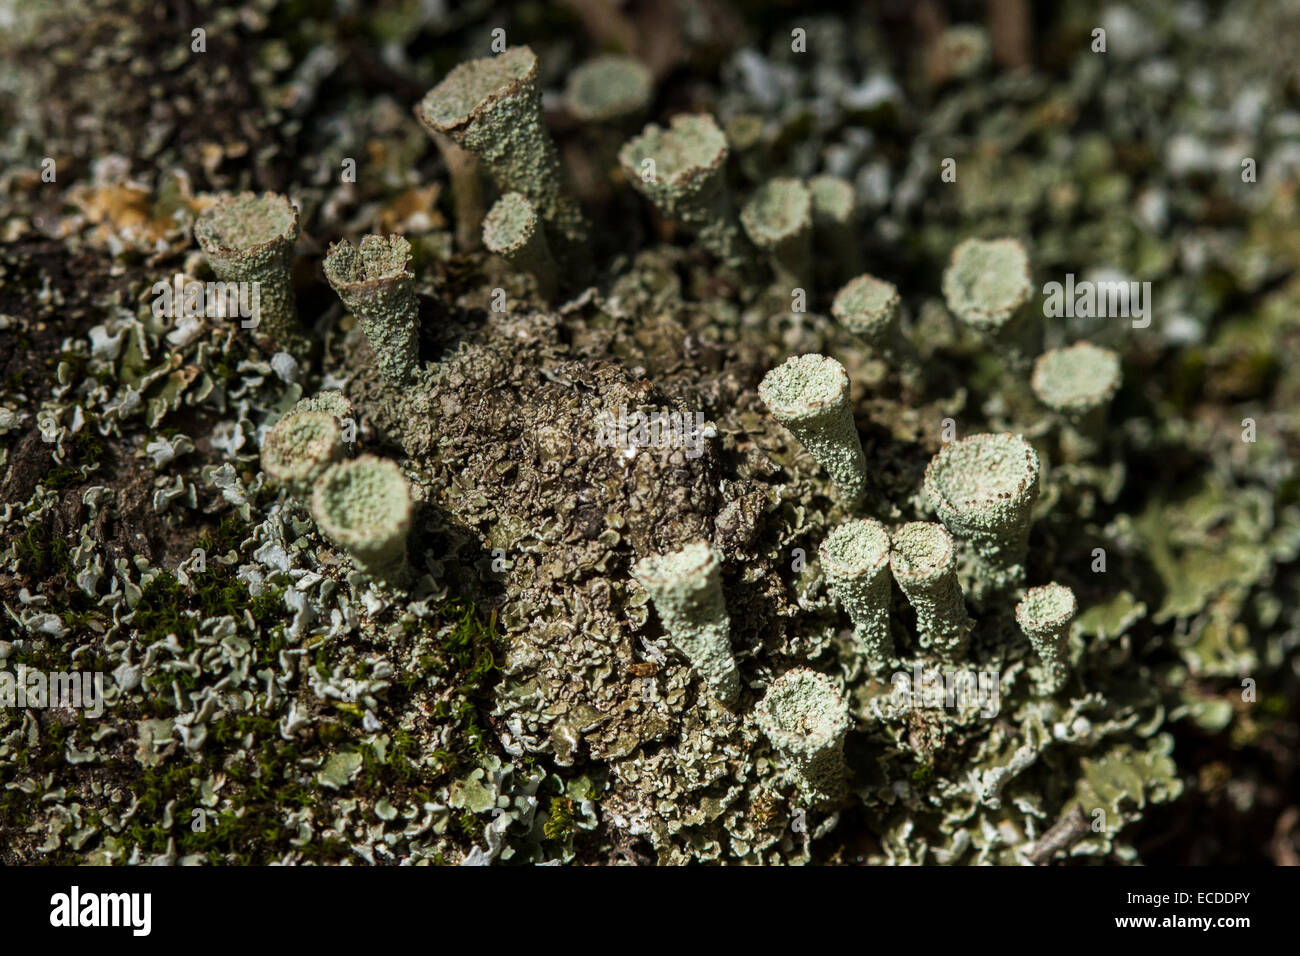 Falso Pixie Cup Cladonia chlorophaea Foto Stock